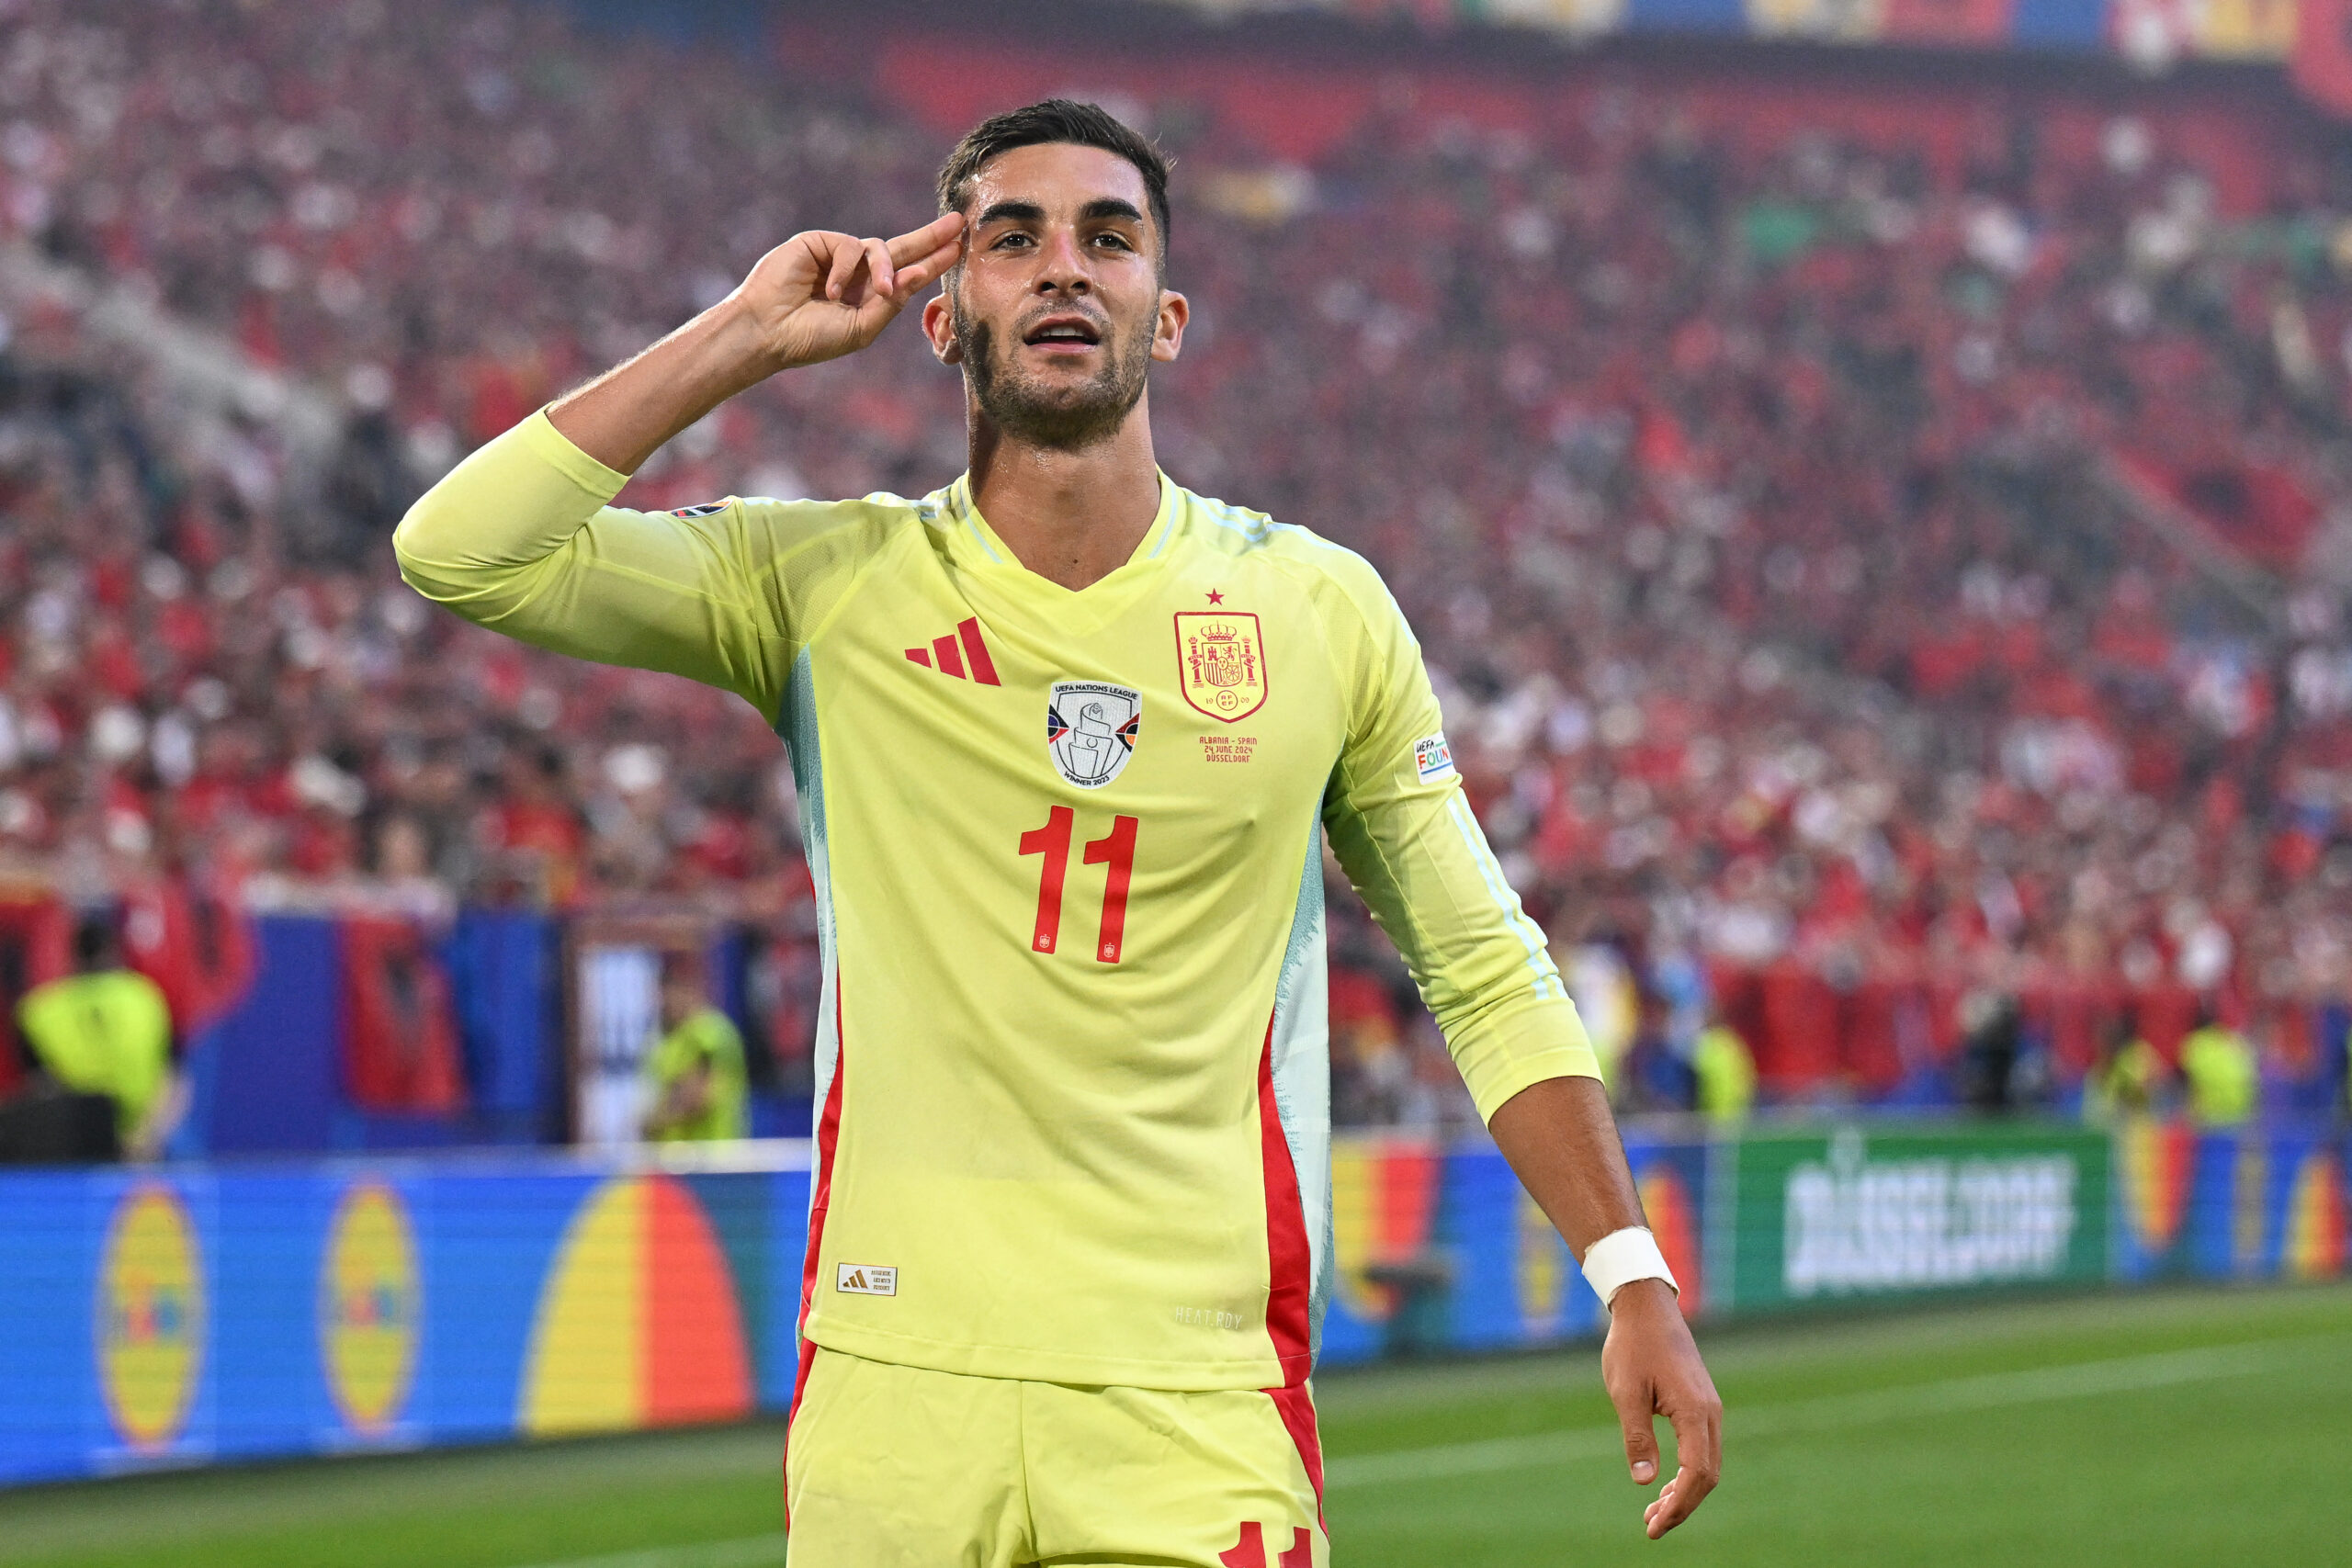 Spain's forward #11 Ferran Torres celebrates scoring his team's first goal during the UEFA Euro 2024 Group B football match between Albania and Spain at the Duesseldorf Arena in Duesseldorf on June 24, 2024.